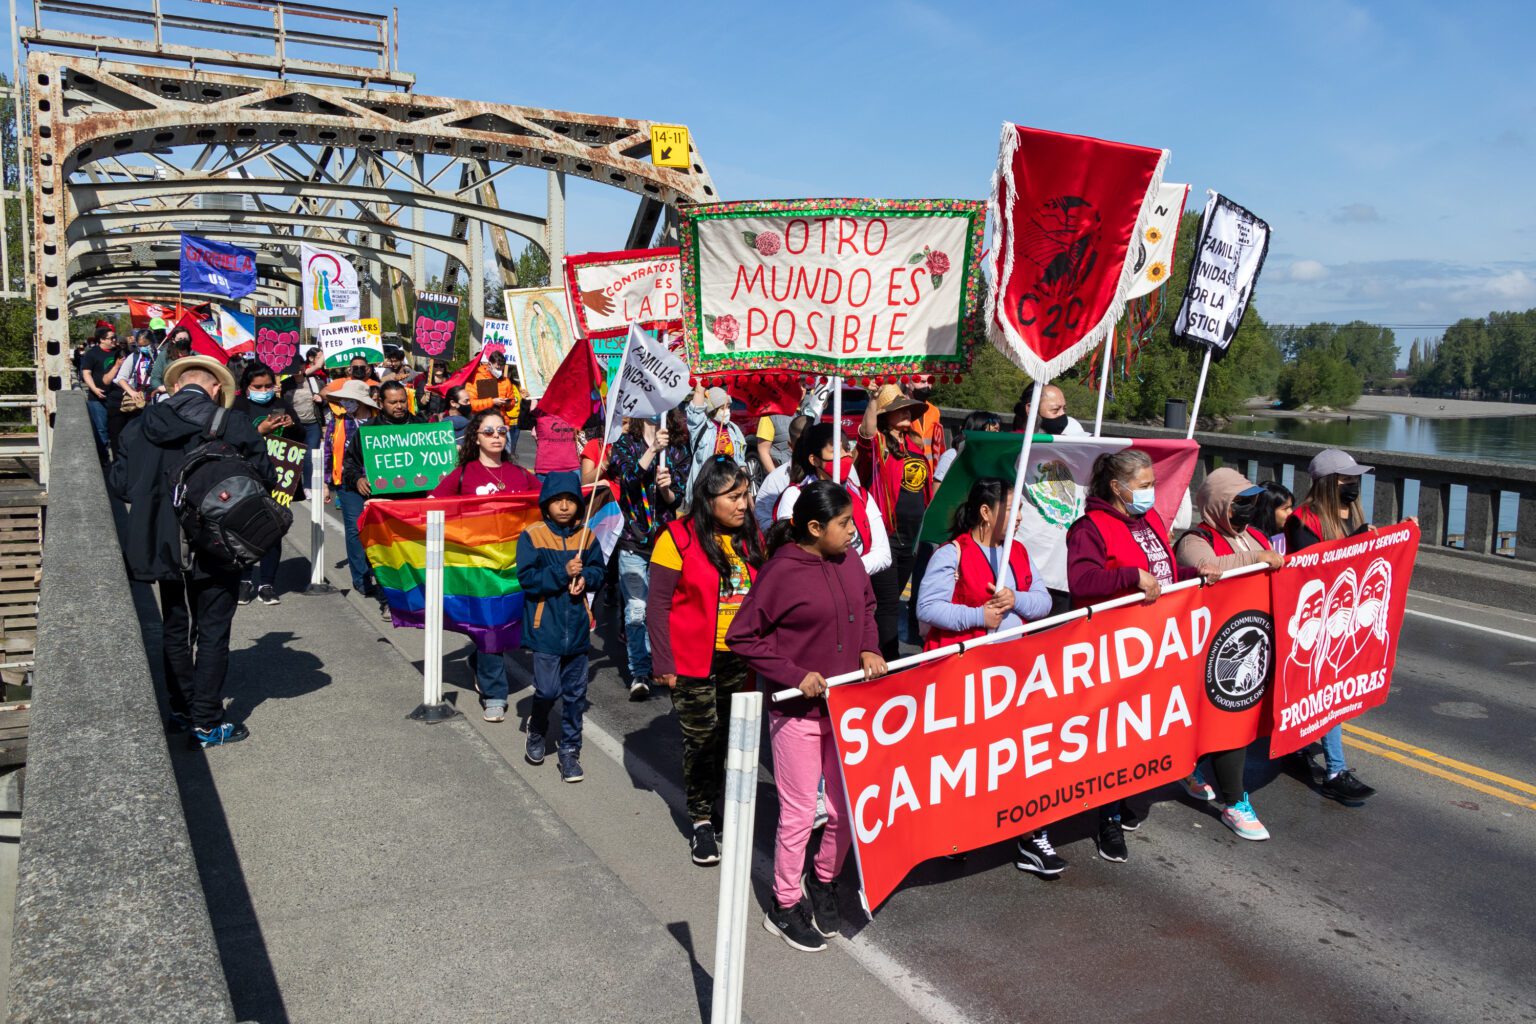 A march supporting farmworkers and advocating for improved working conditions called Marcha Campesina